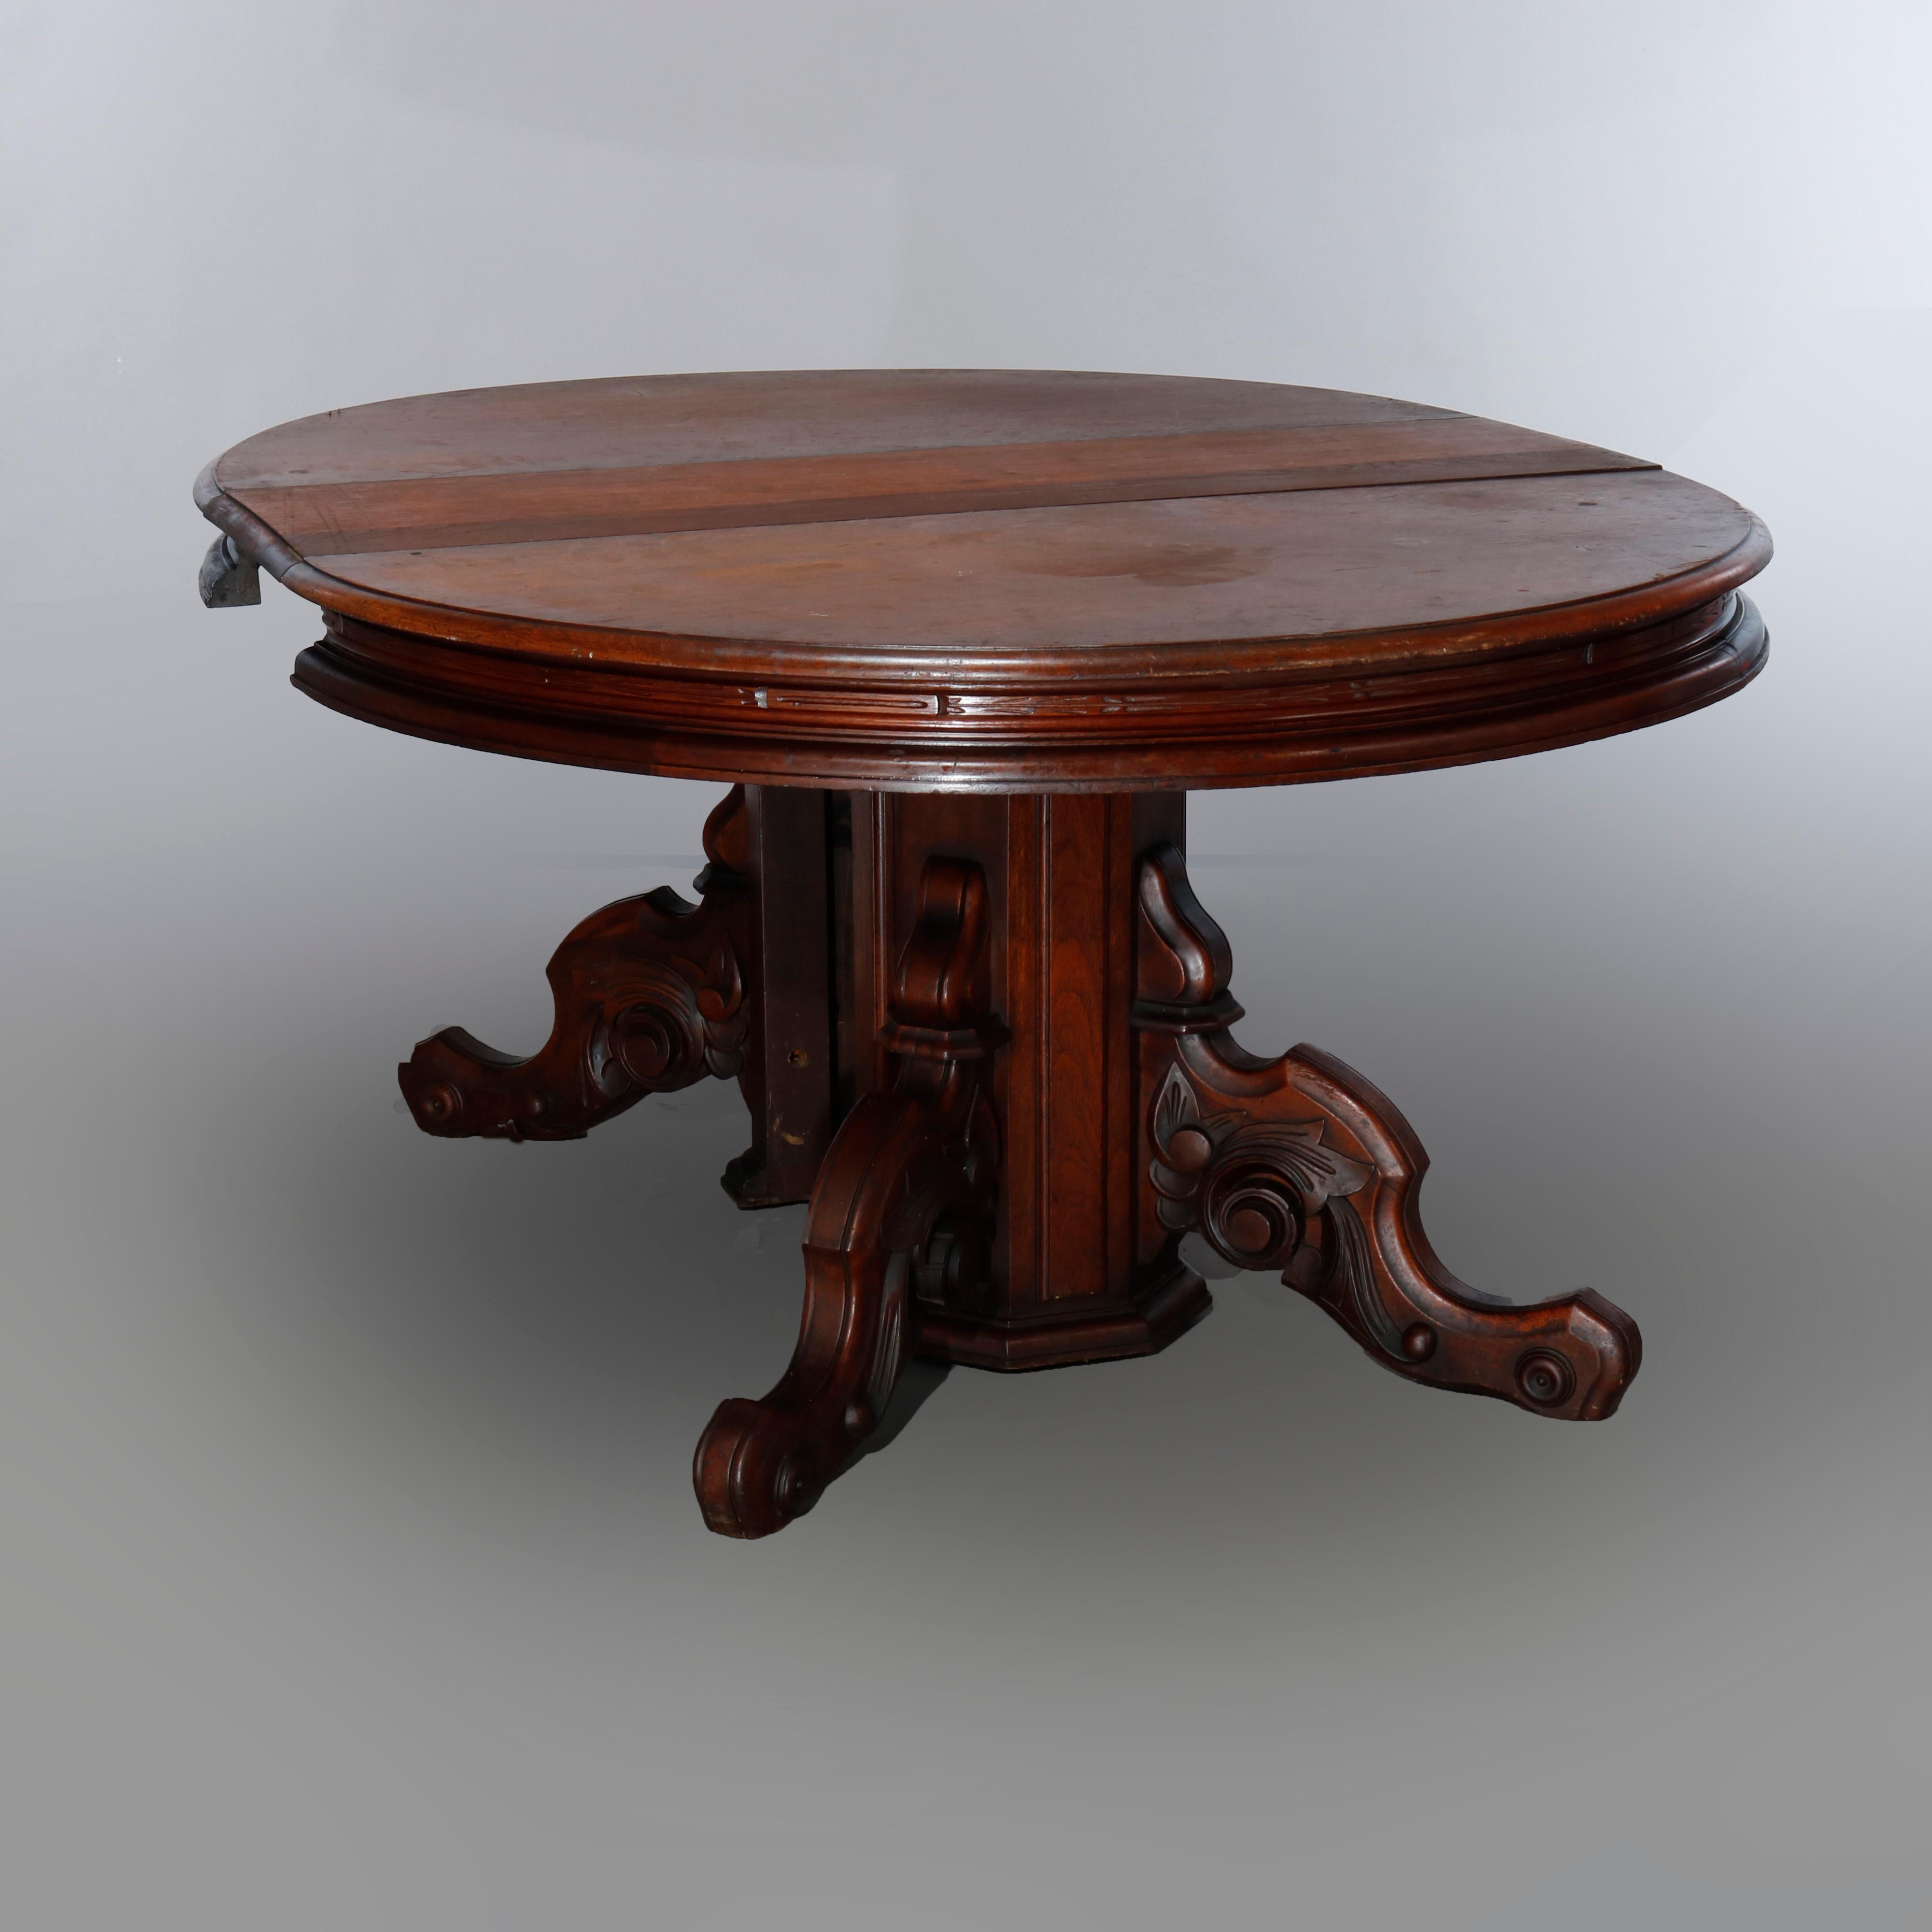 Antique Renaissance Revival Carved Walnut Extension Dining Table & Leaves, c1880 2